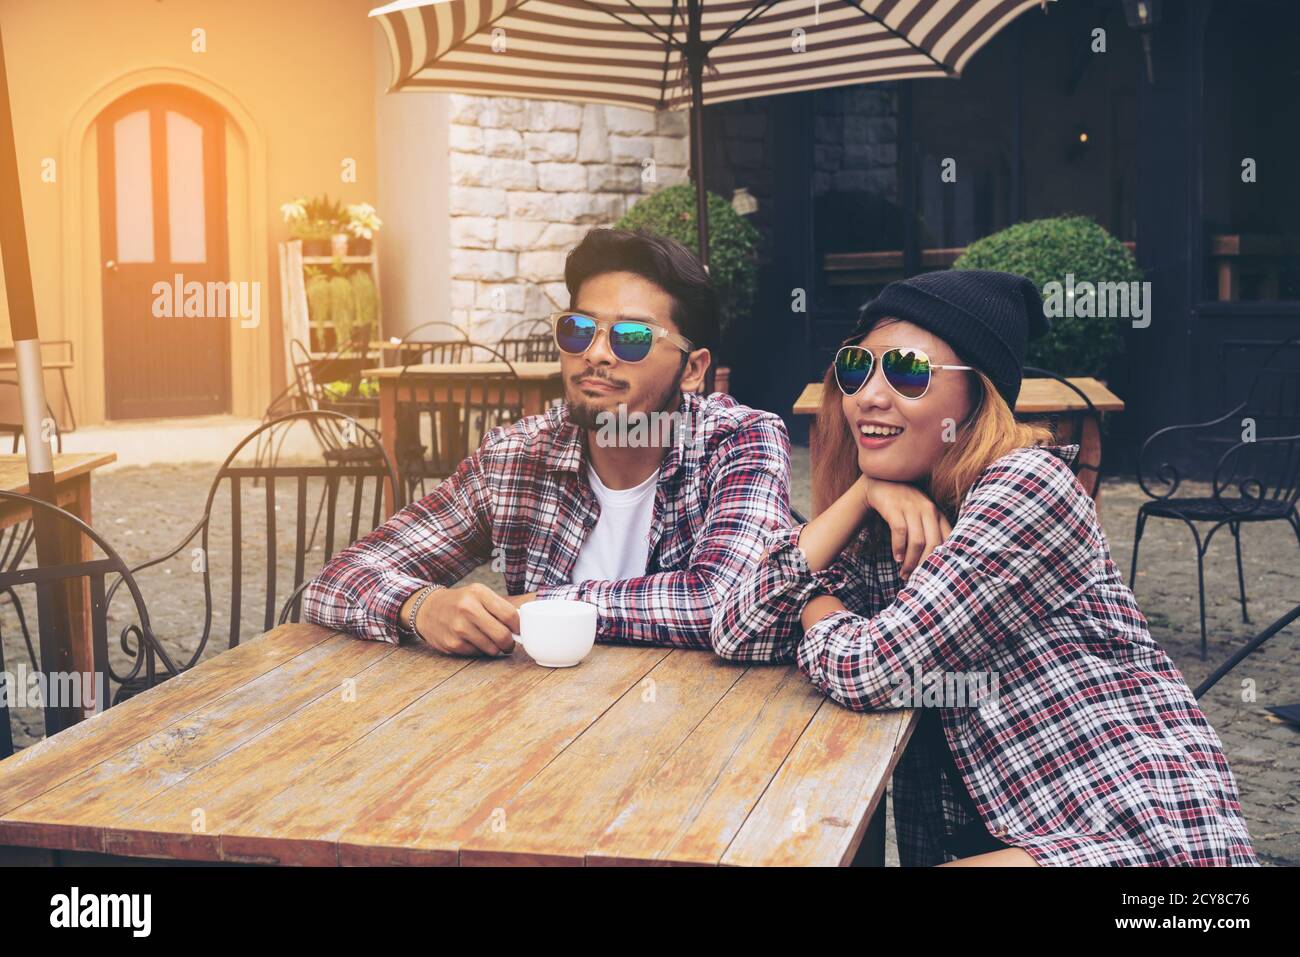 Asian and Arabic students couple hanging out in cafe european style Stock Photo